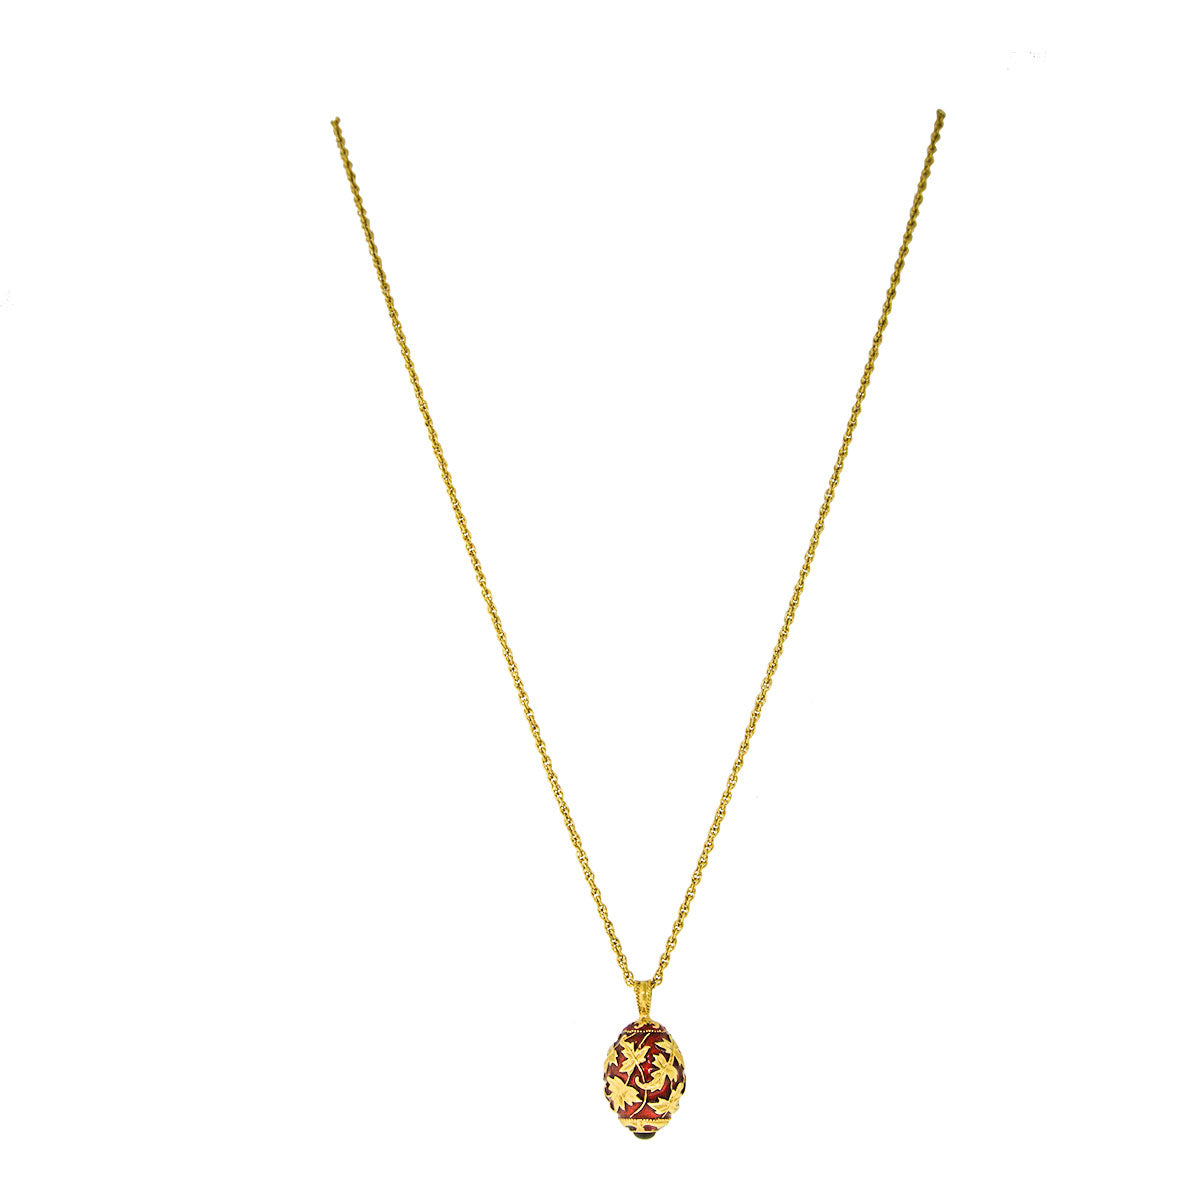 Gold Leaf Ruby Red Charm Pendant Necklace For Women - Back Side